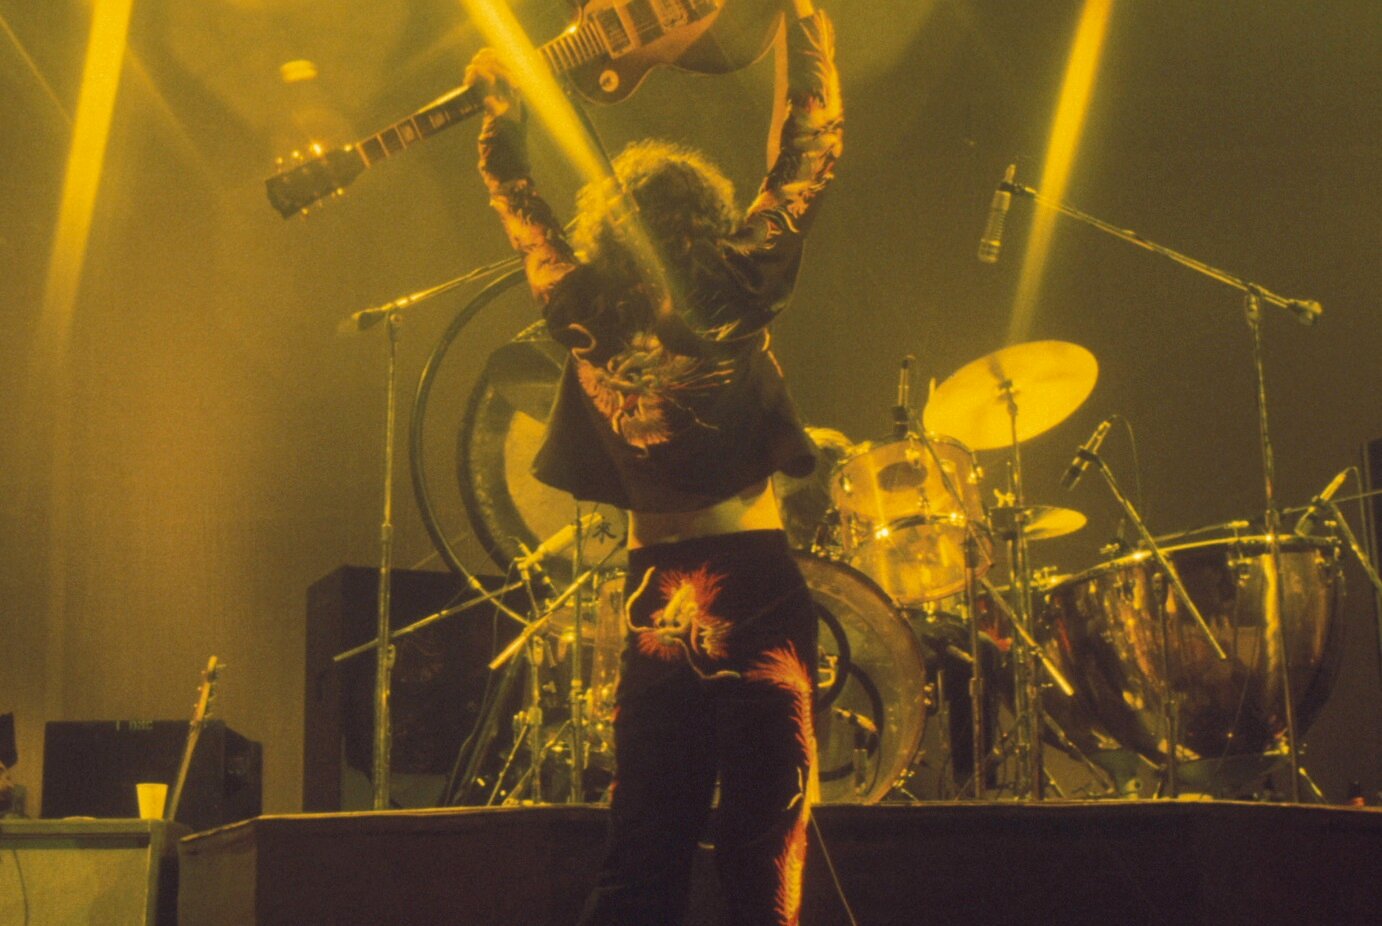 Jimmy Page, wearing a suit with colorful dragons sewn onto it, holds his guitar overhead on stage at Earl's Court, May 1975 